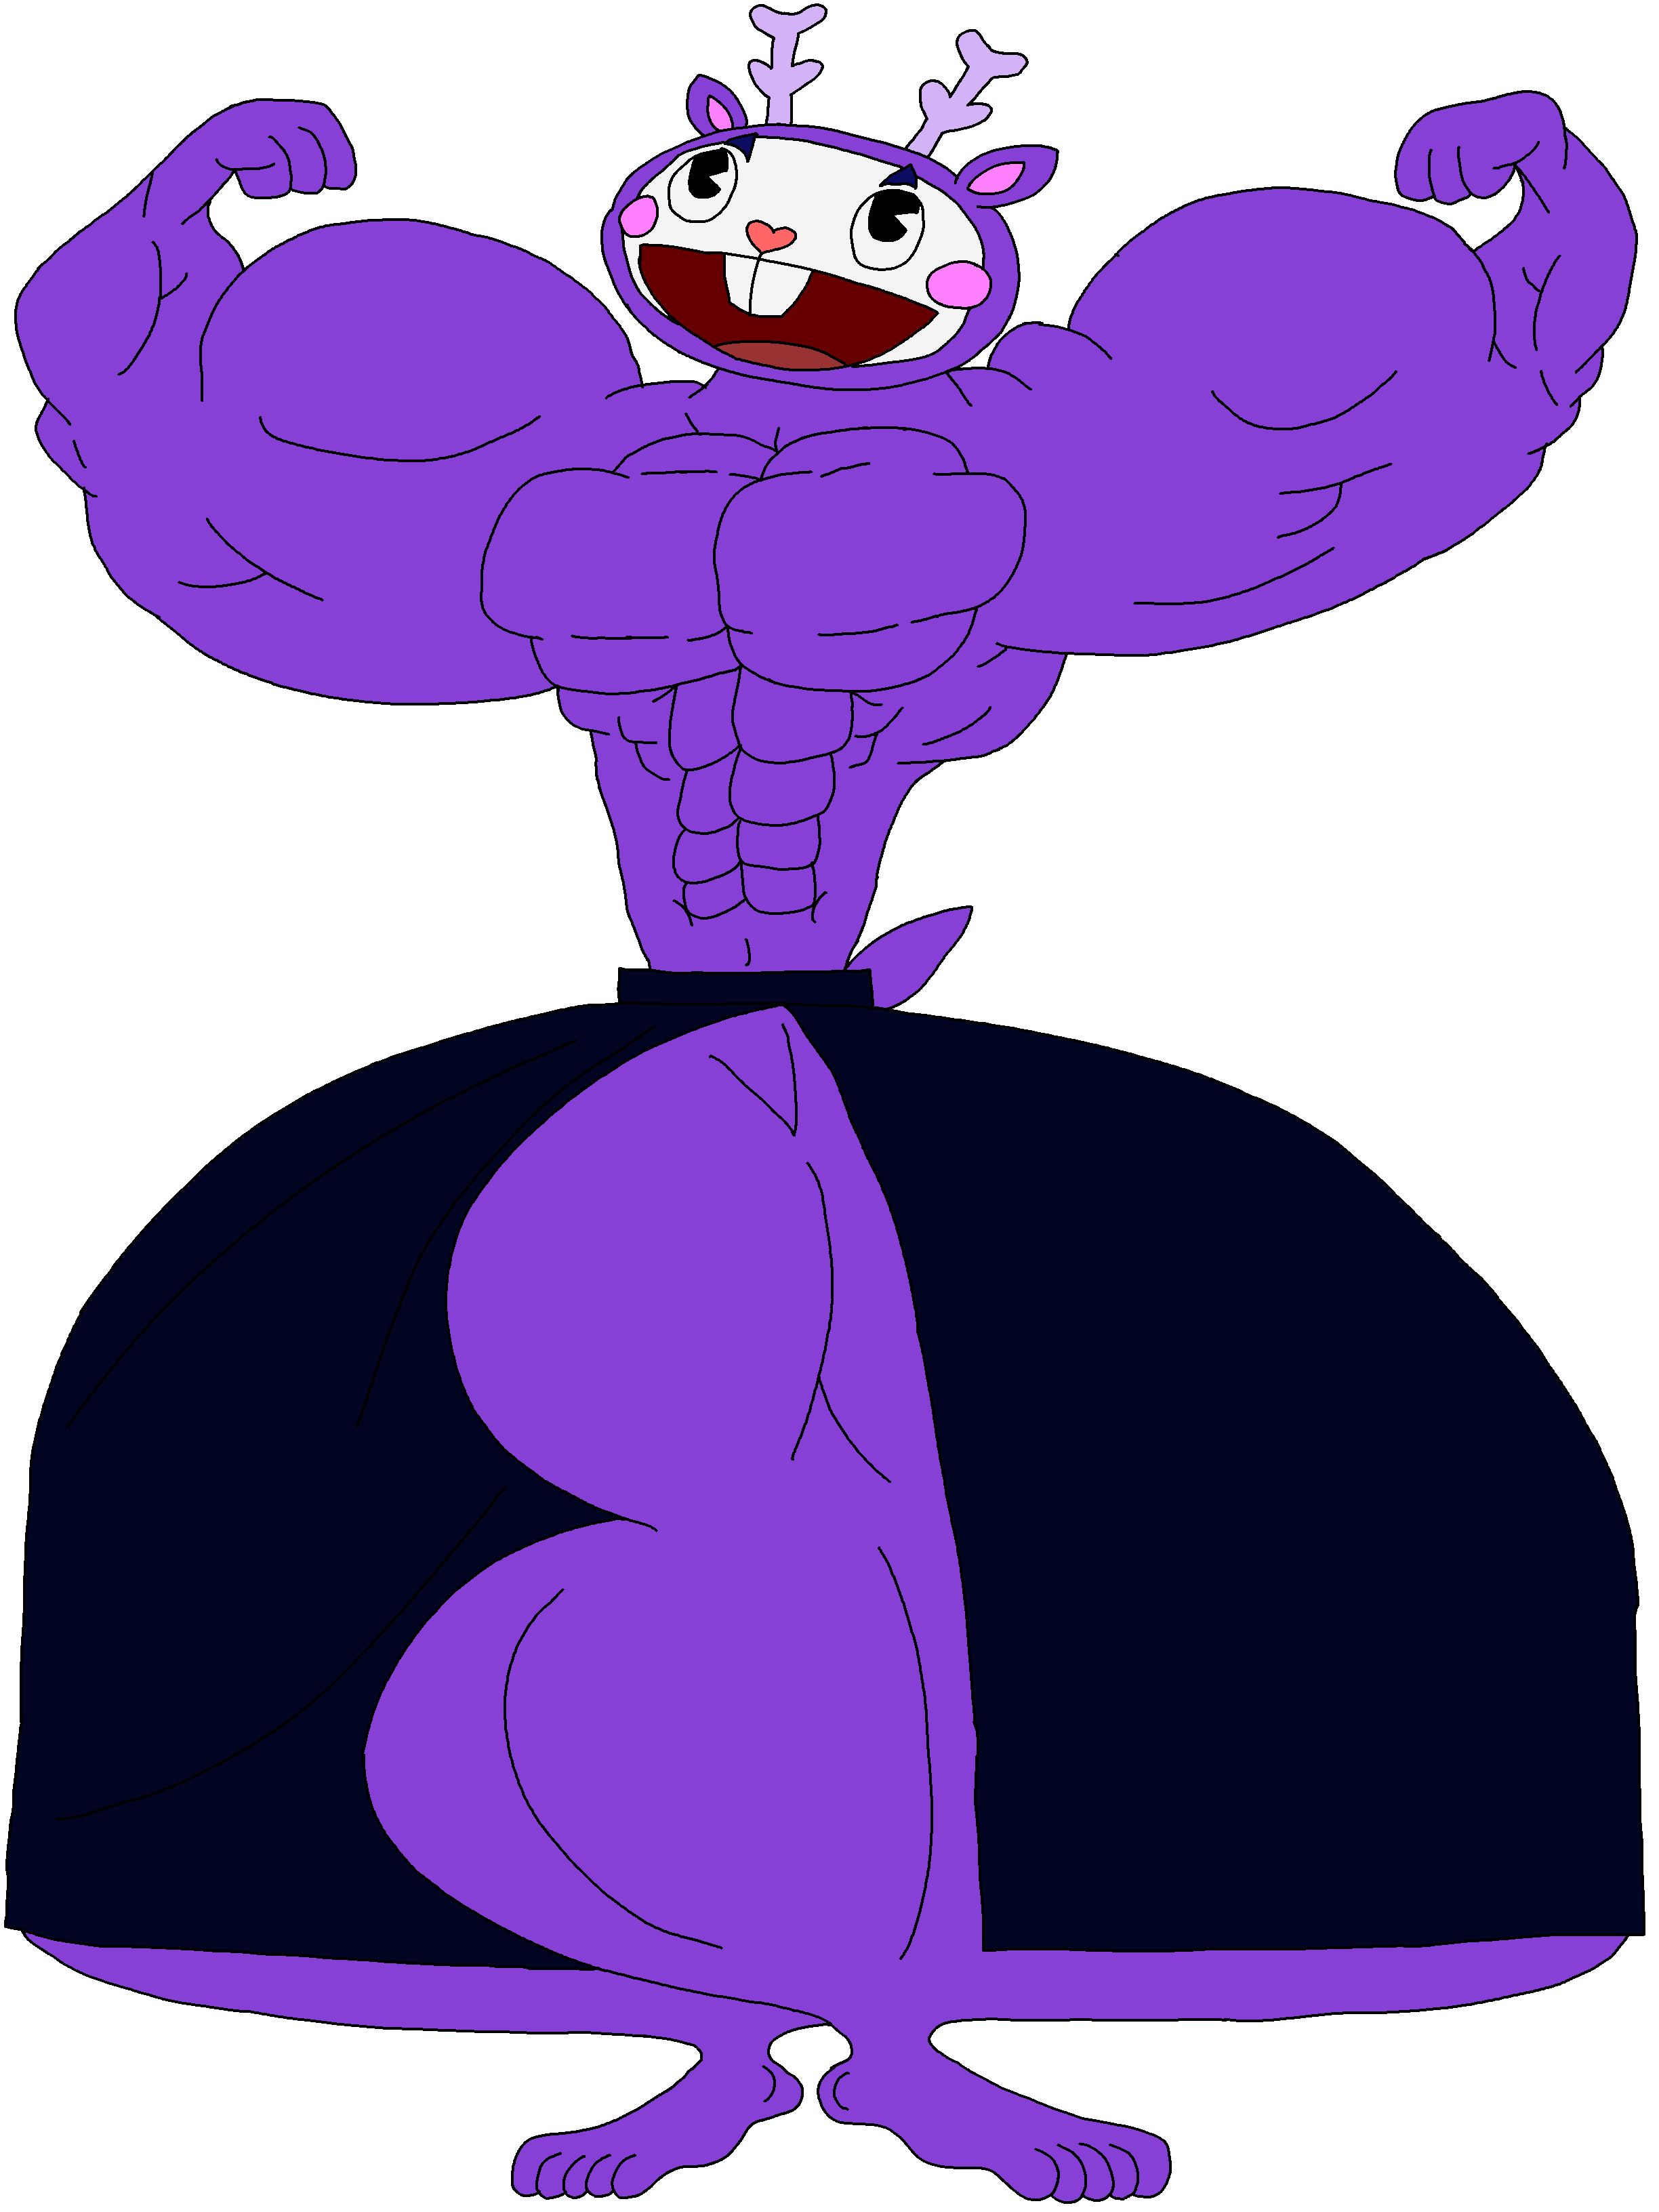 Jumba Show Me Your Muscle by MsLizEzor on DeviantArt